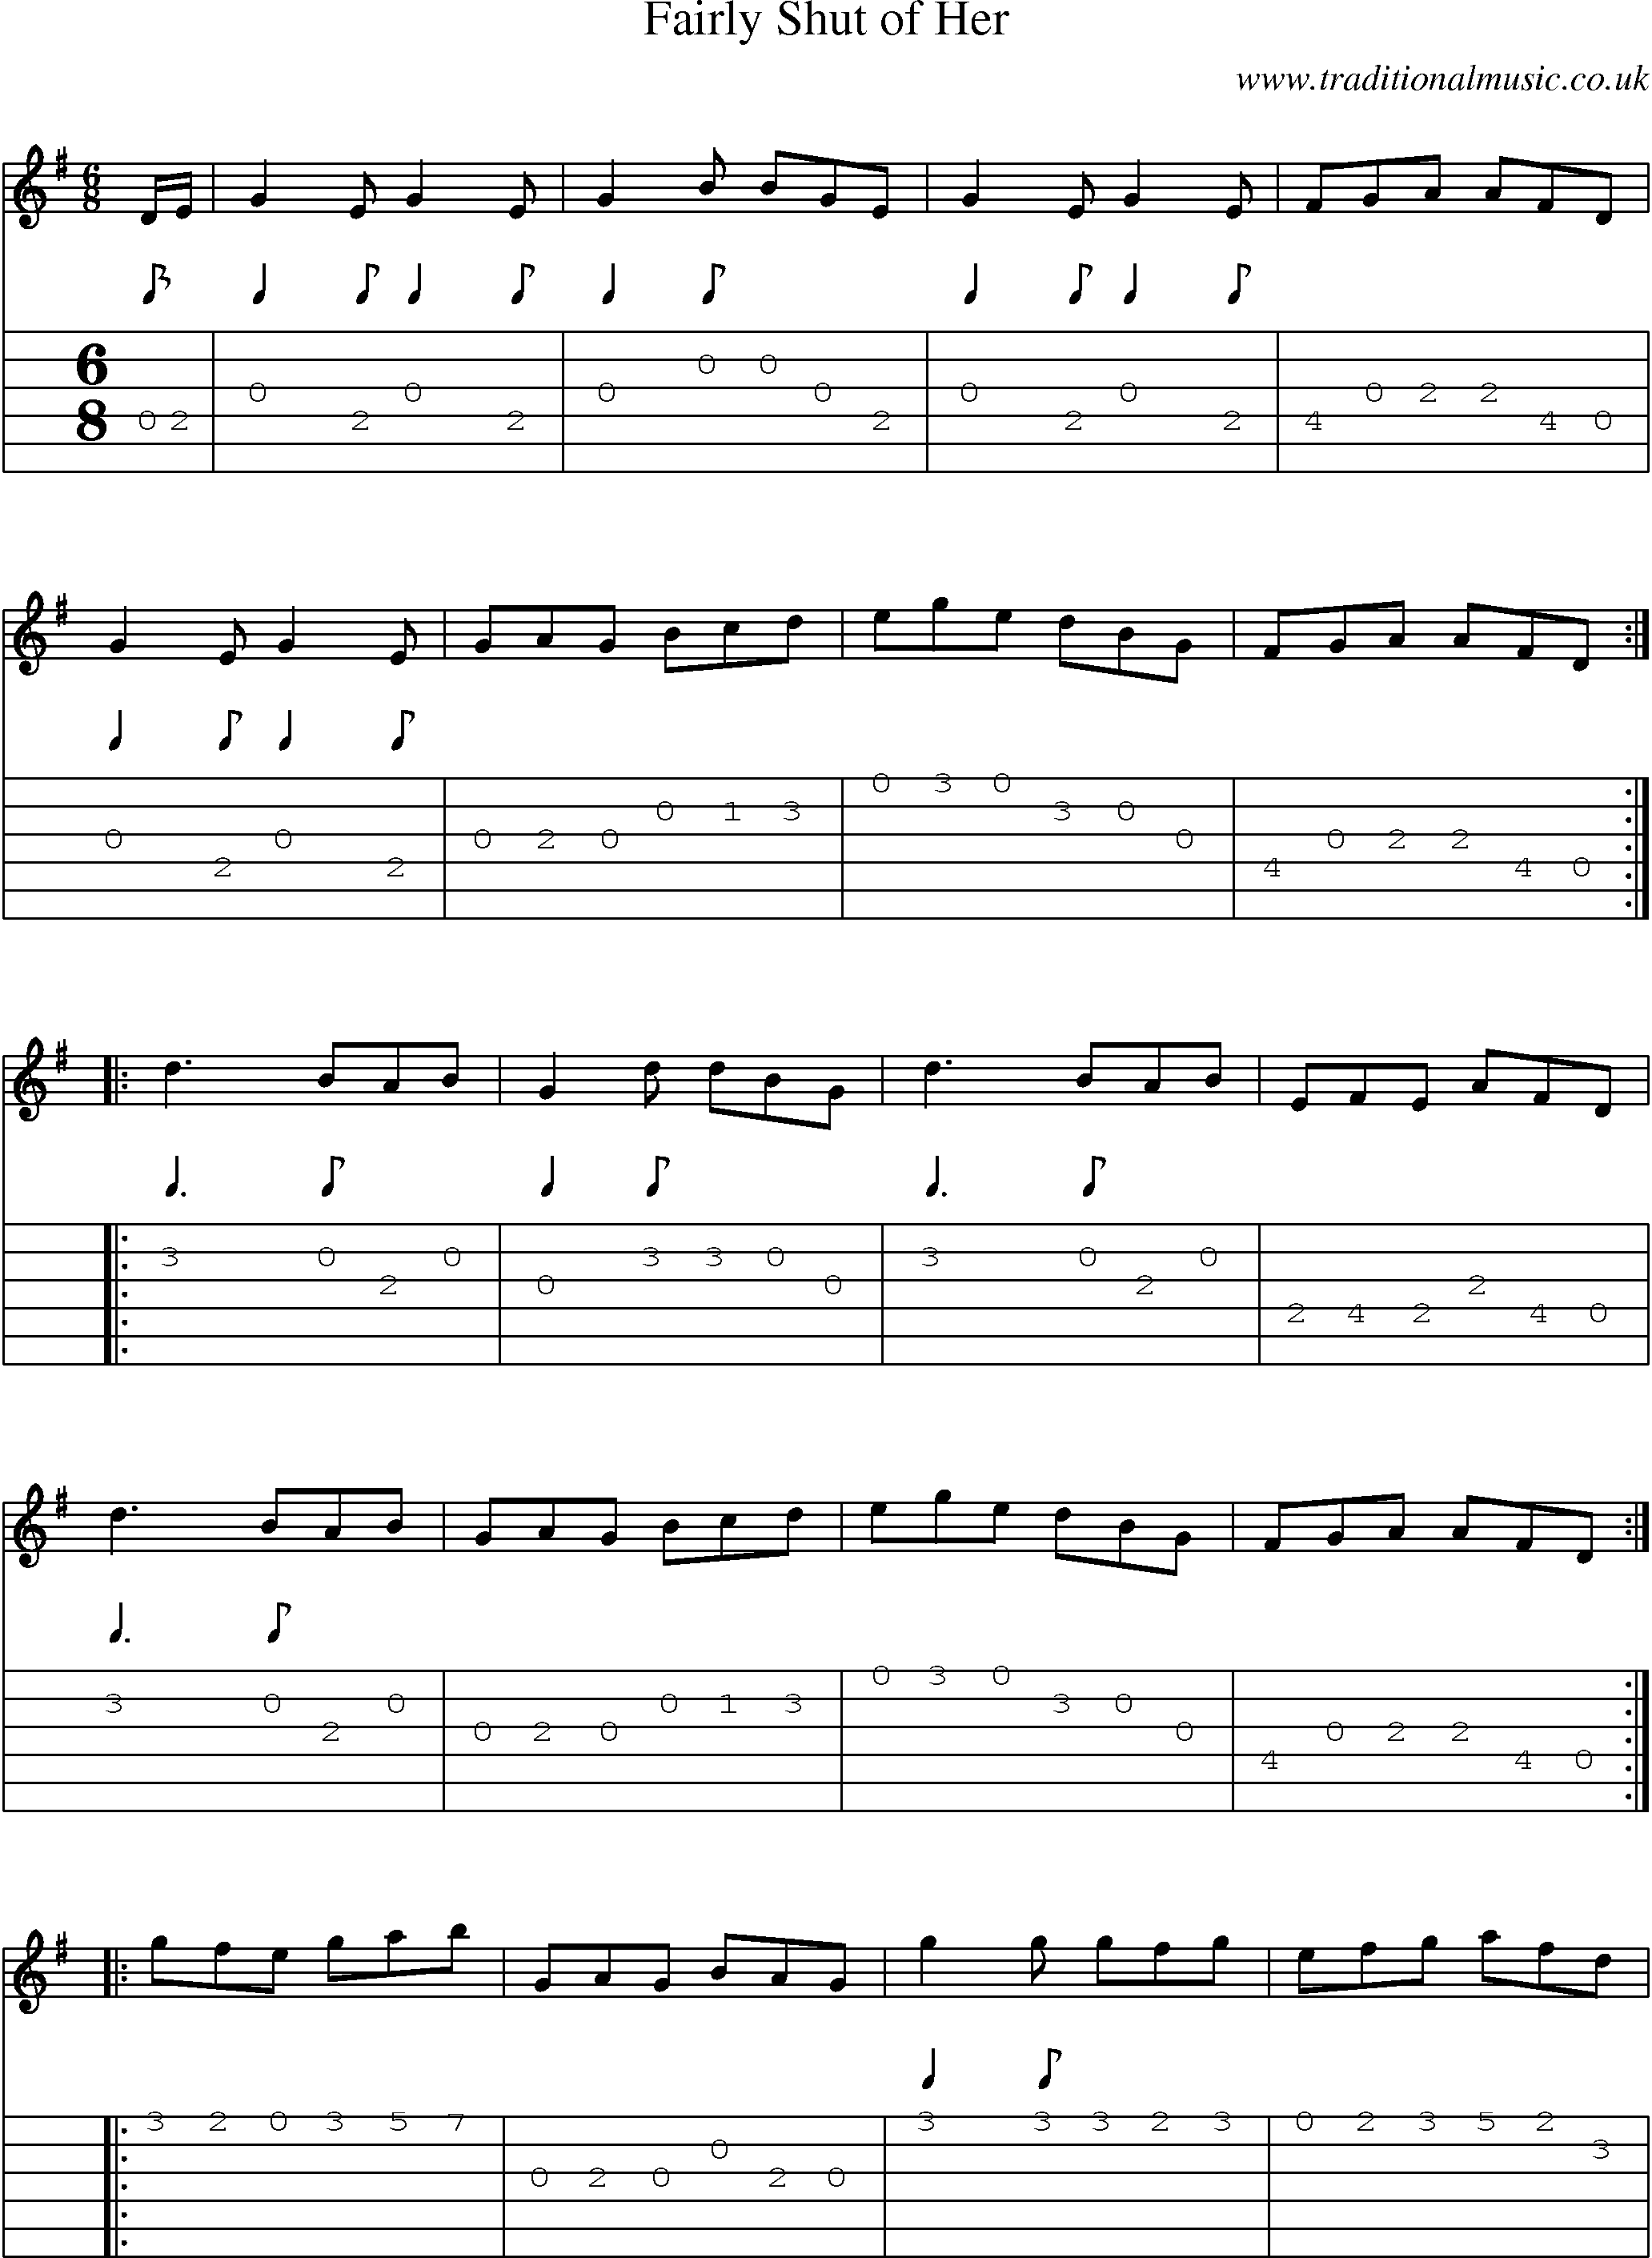 Music Score and Guitar Tabs for Fairly Shut Of Her